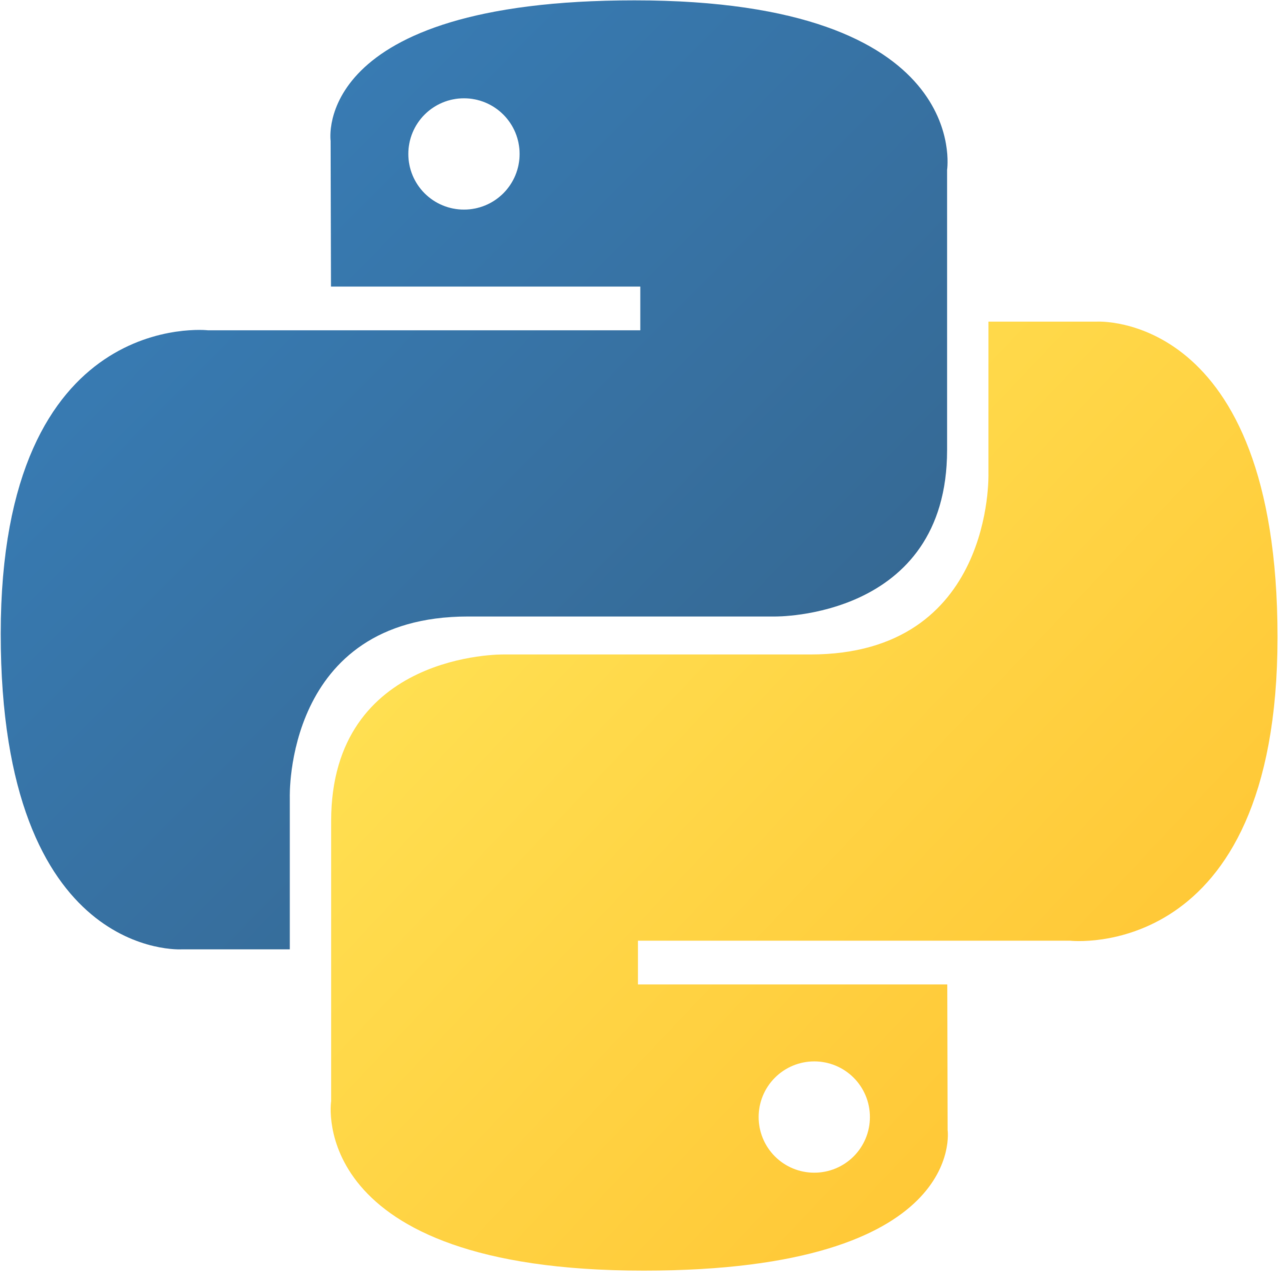 Asynchronous Requests in Python